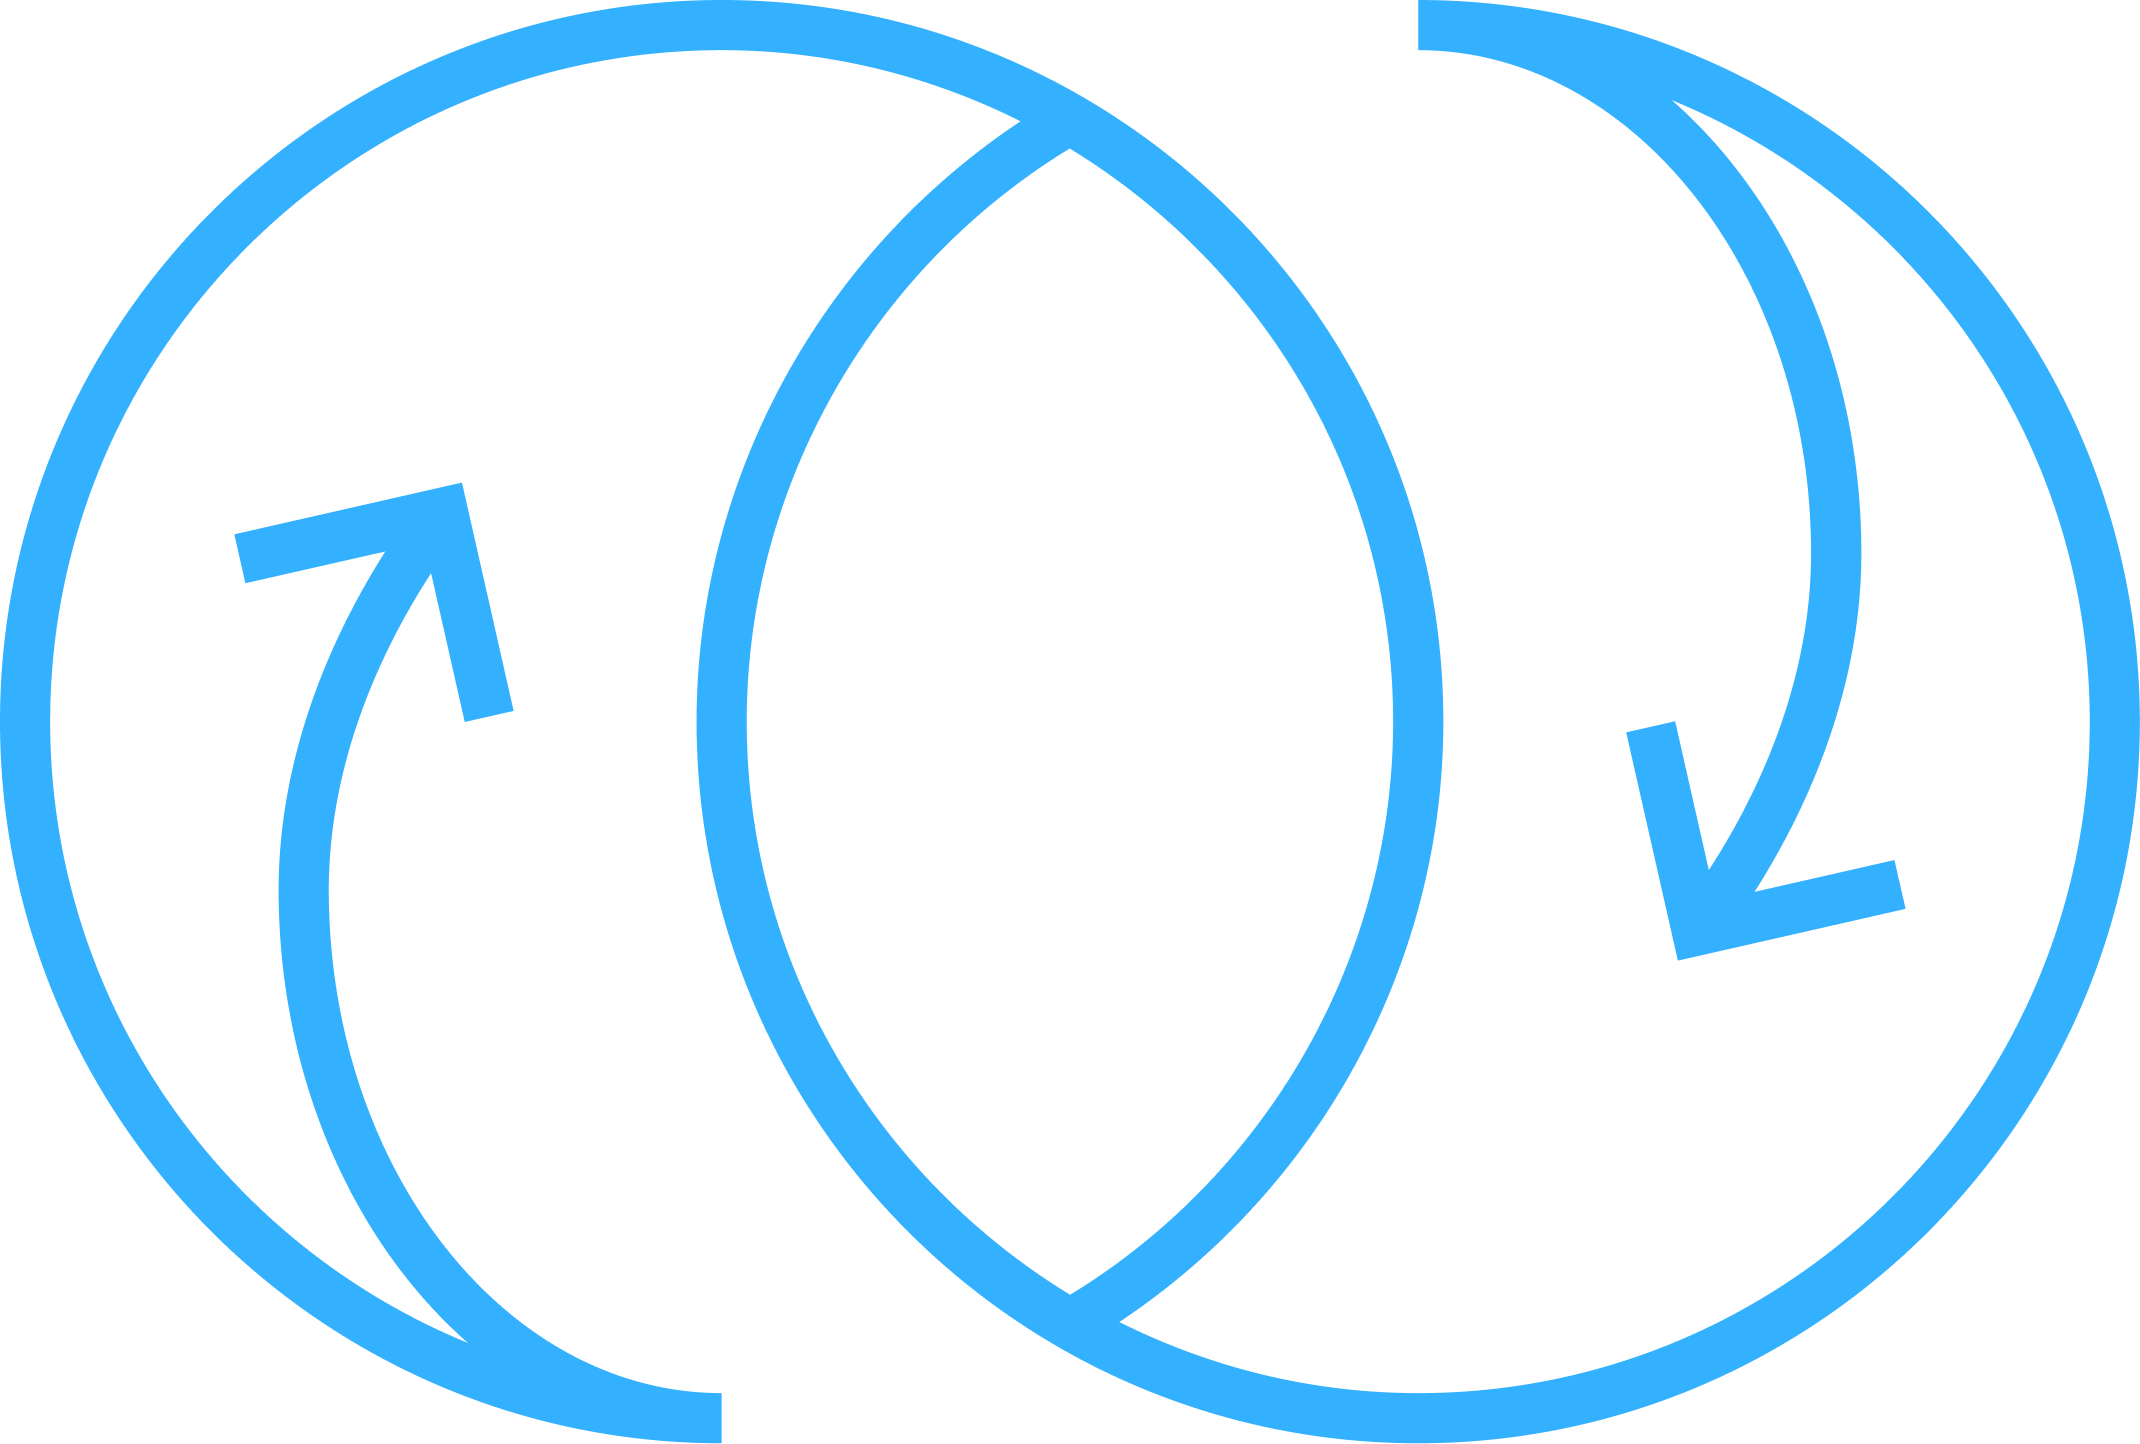 Unity logo with two arrows in a circular motion facing each other, representing the two courses offered